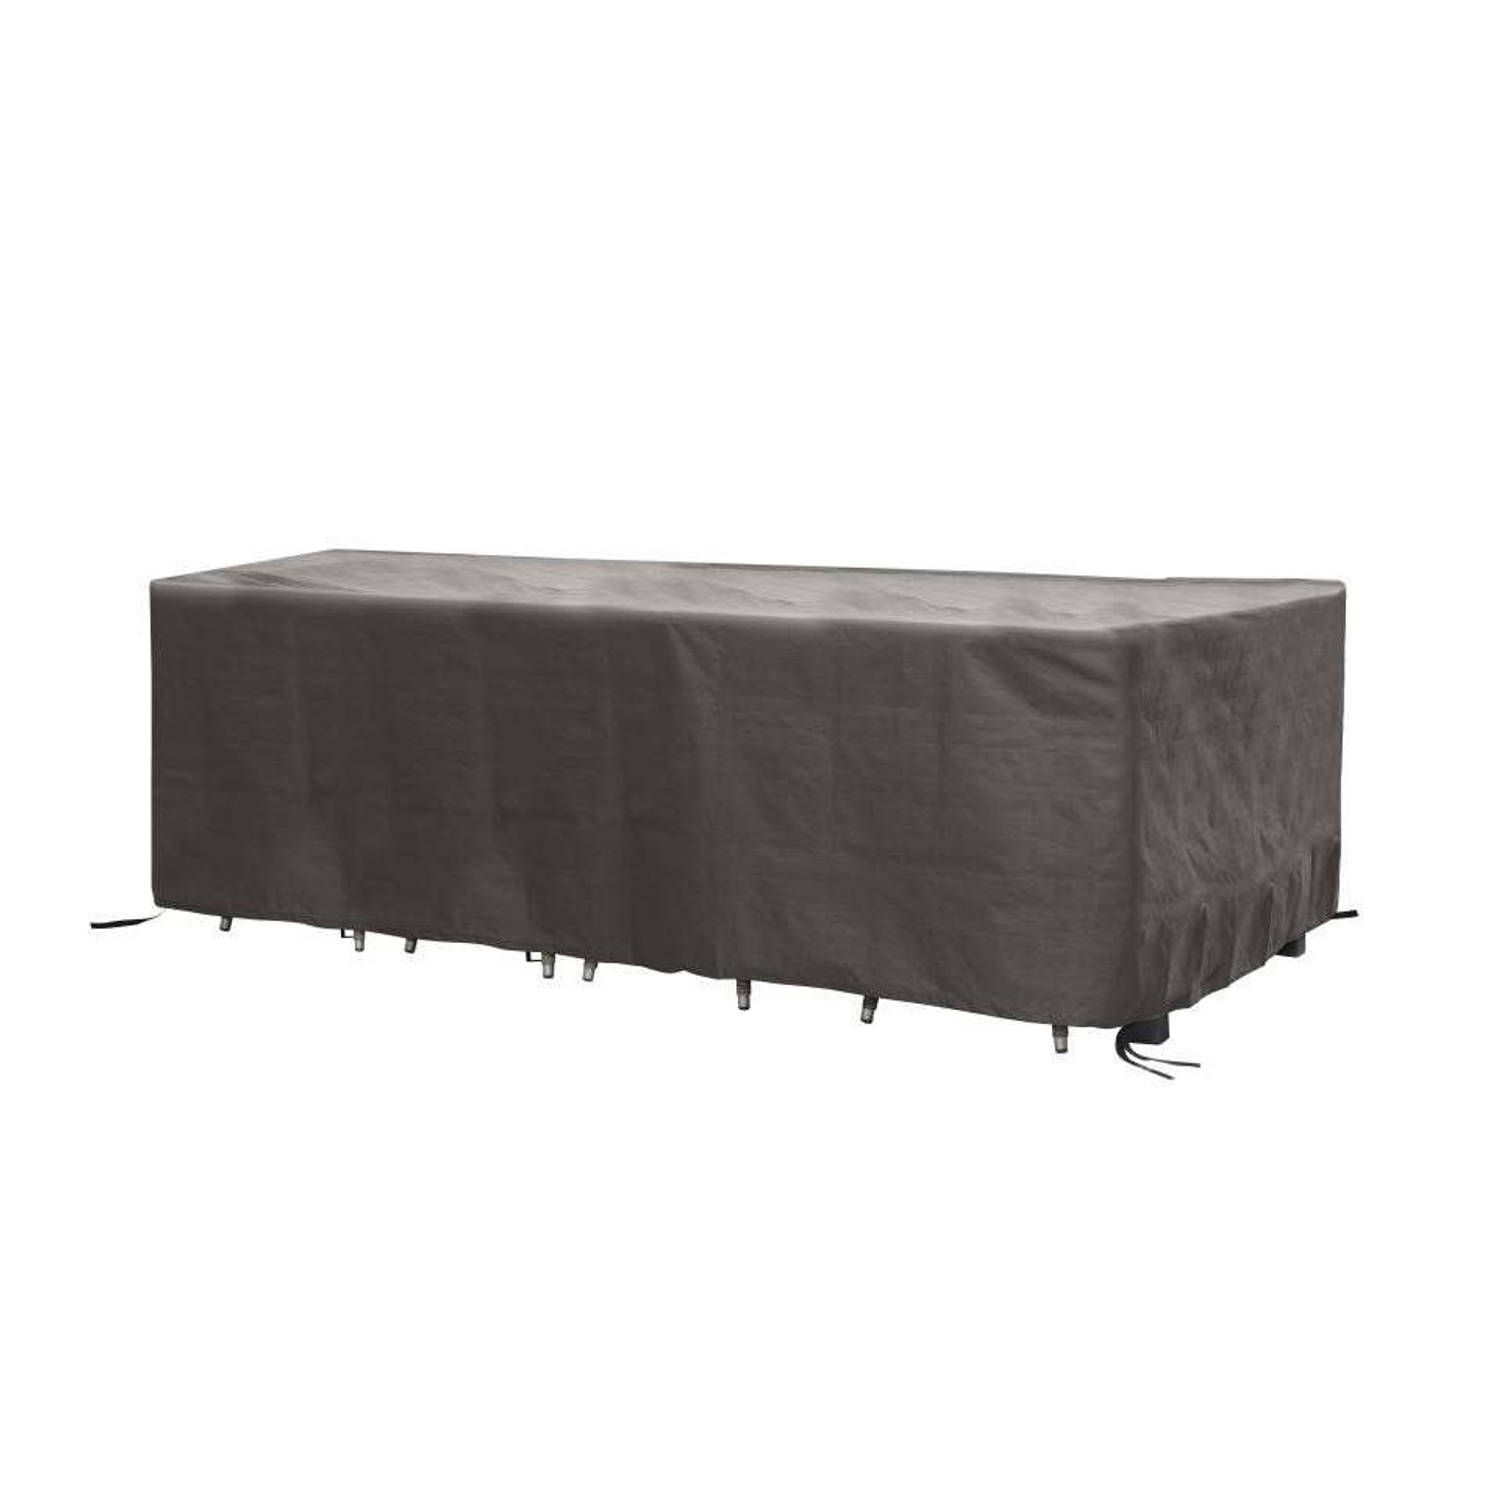 Outdoor Covers Premium tuinset hoes - 95x180x285